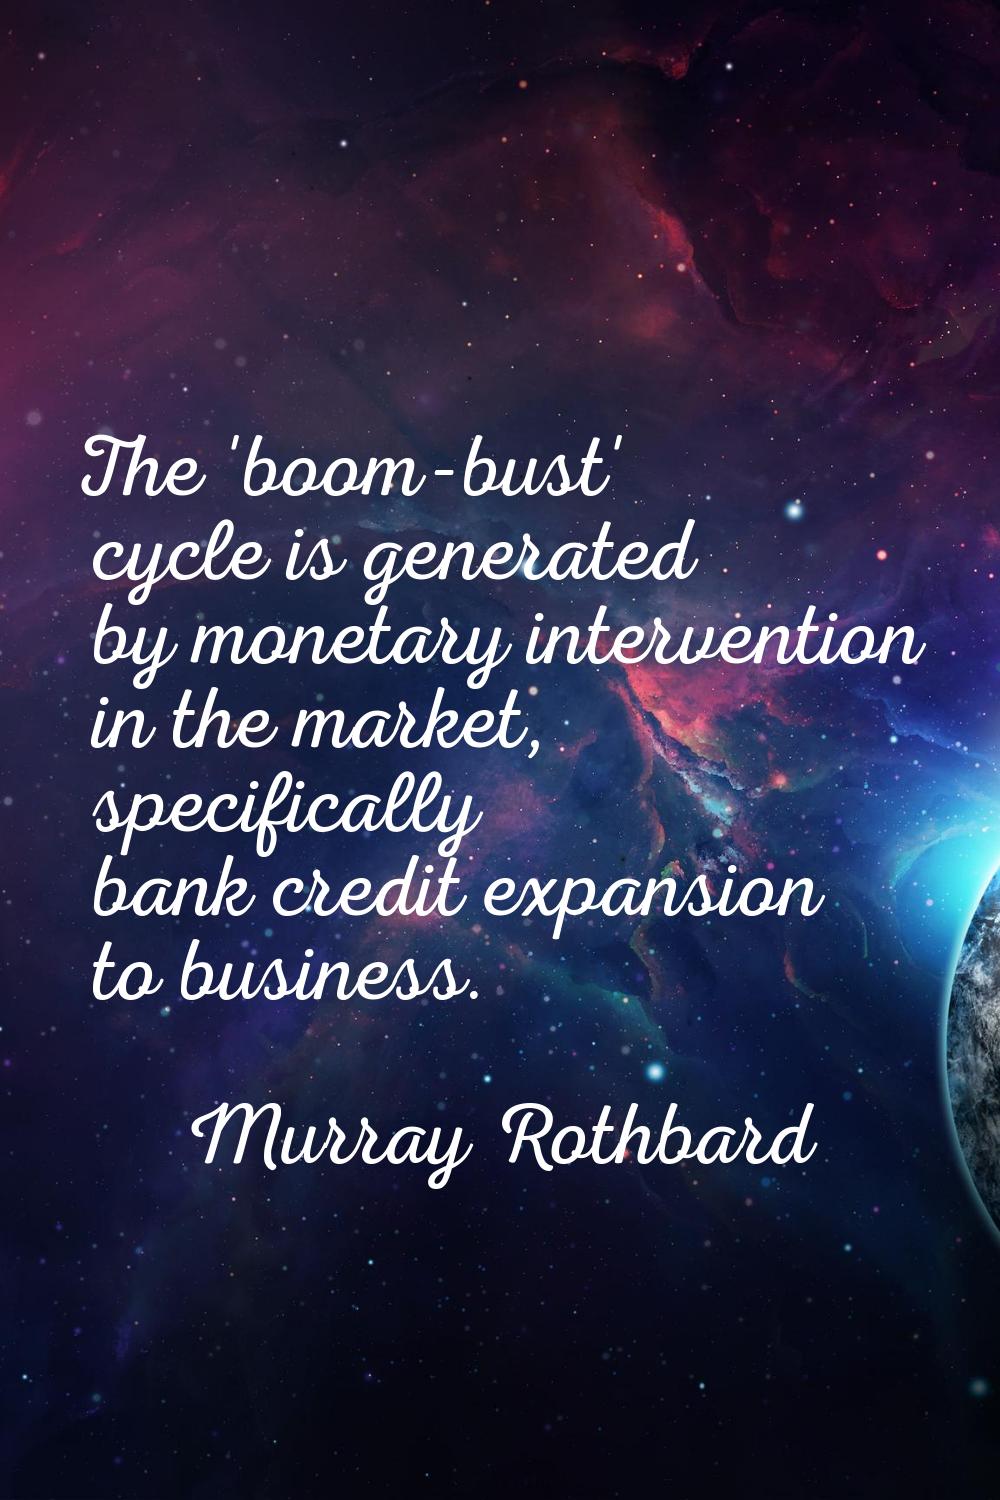 The 'boom-bust' cycle is generated by monetary intervention in the market, specifically bank credit